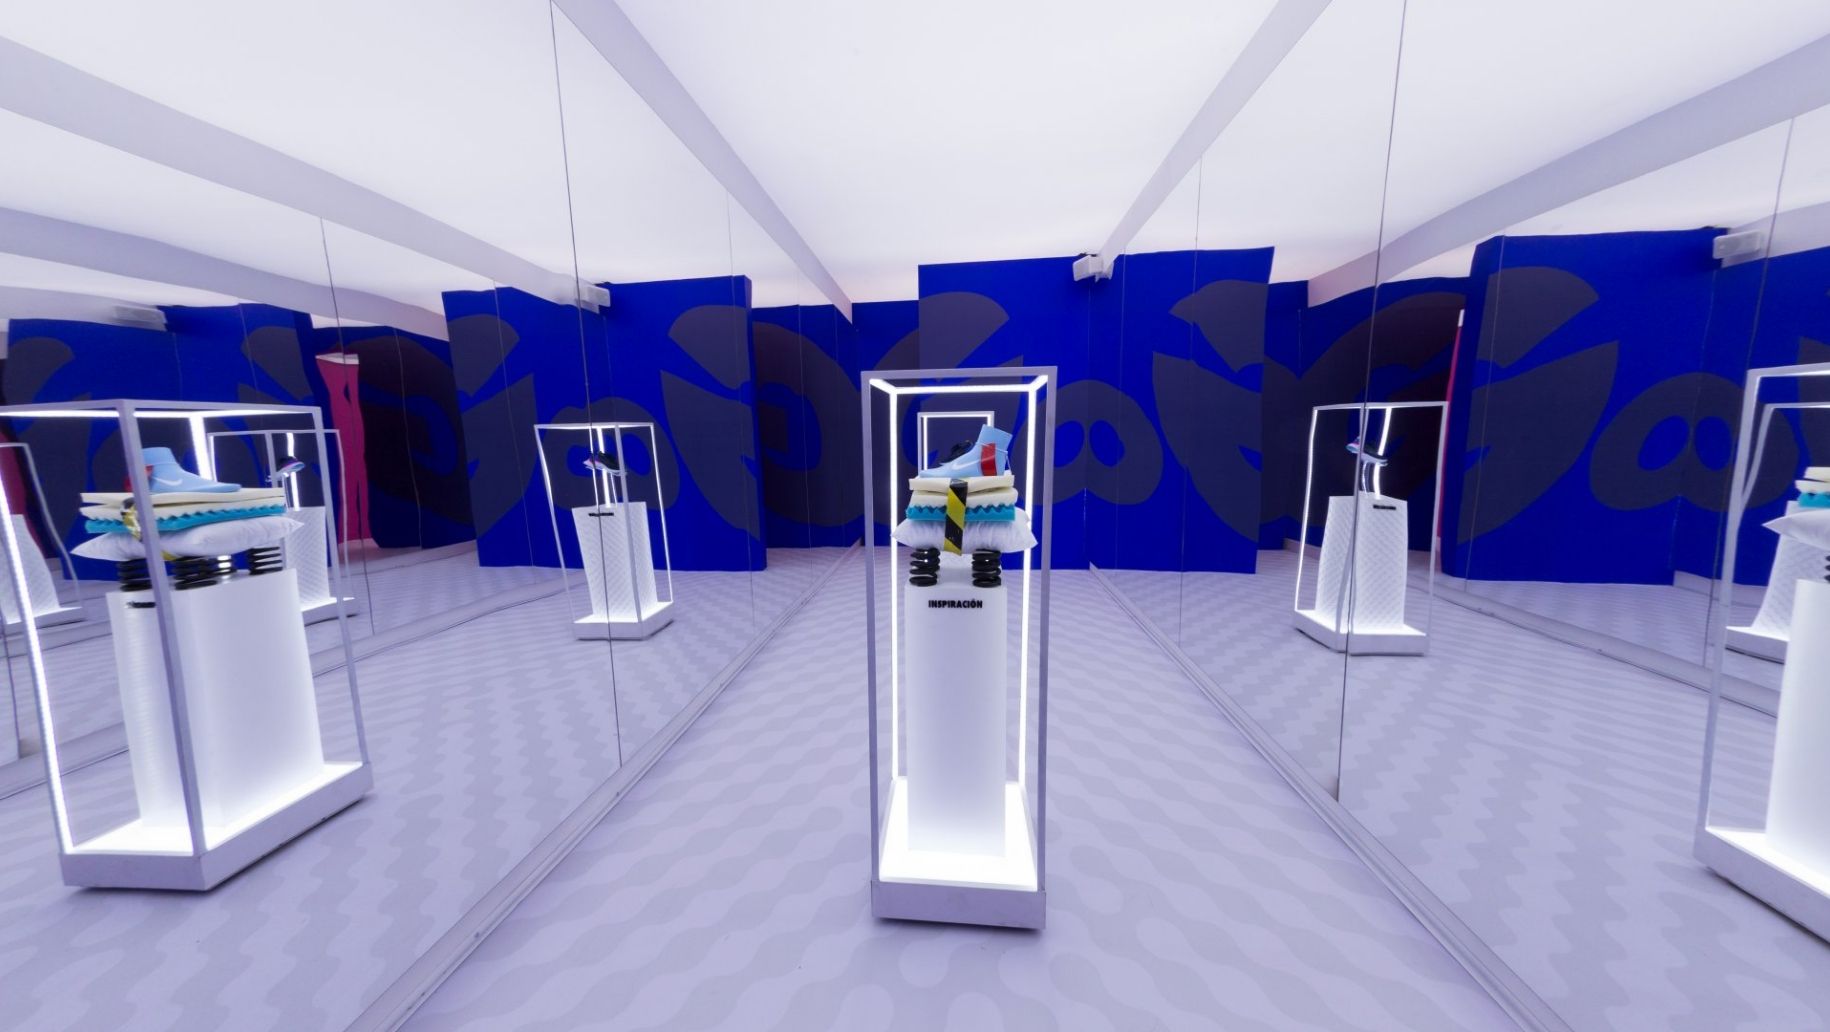 Mirrored room exhibit showing inspiration of shoe with multiple layers of foam and 3 large springs as sole in one podium and actual Nike React sneaker in another podium.